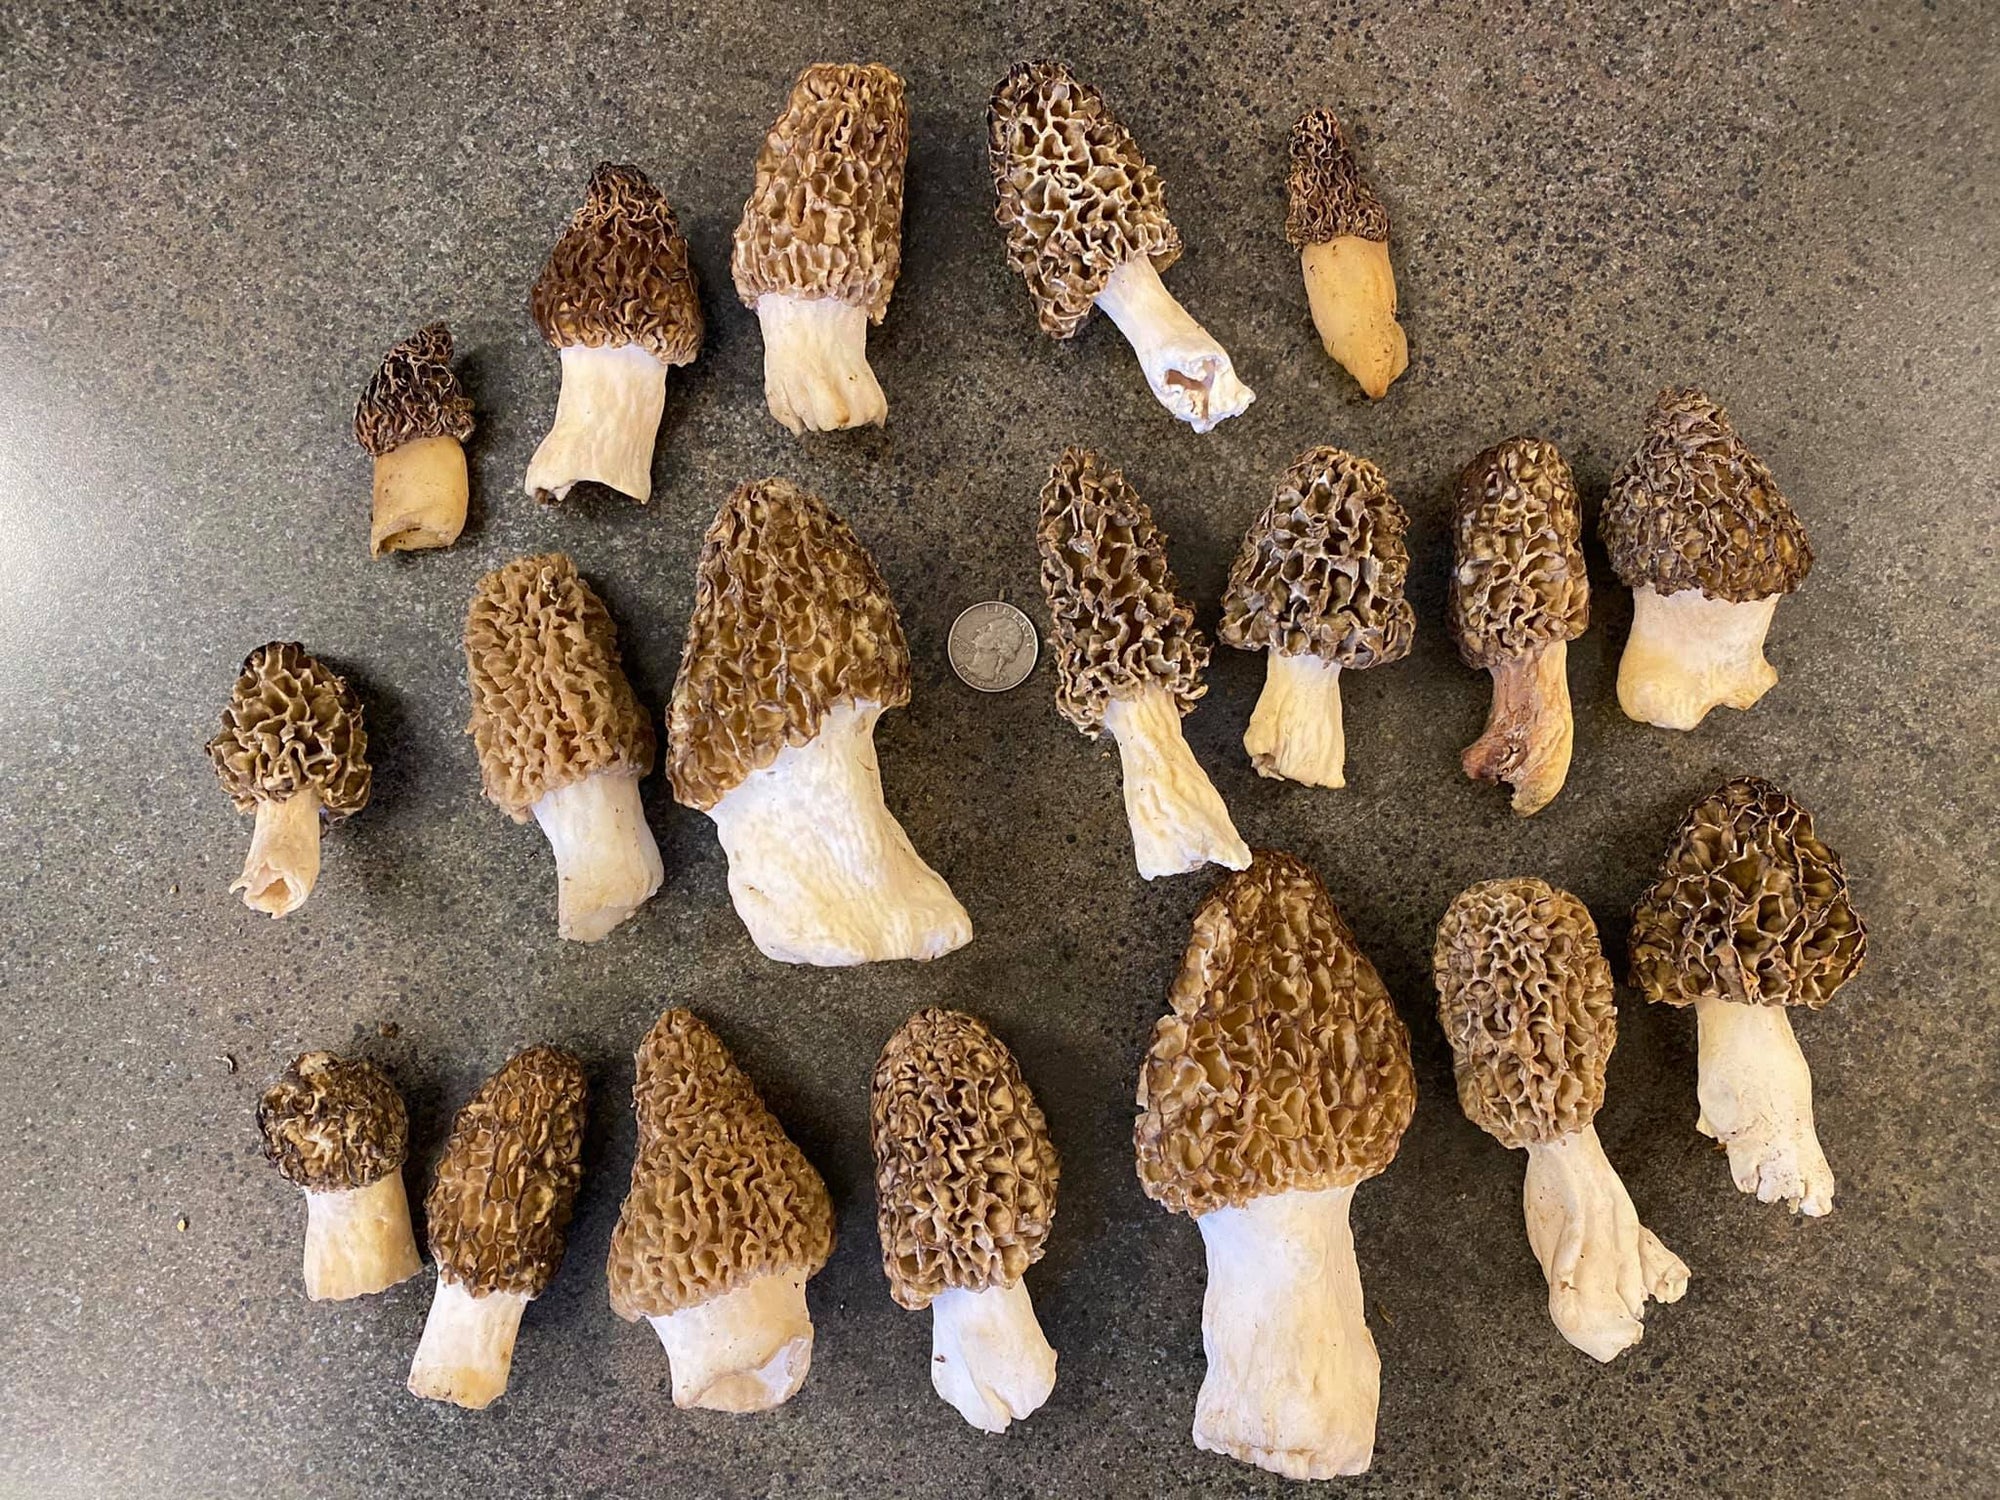 Will Derecho damage lead to more morels this spring?